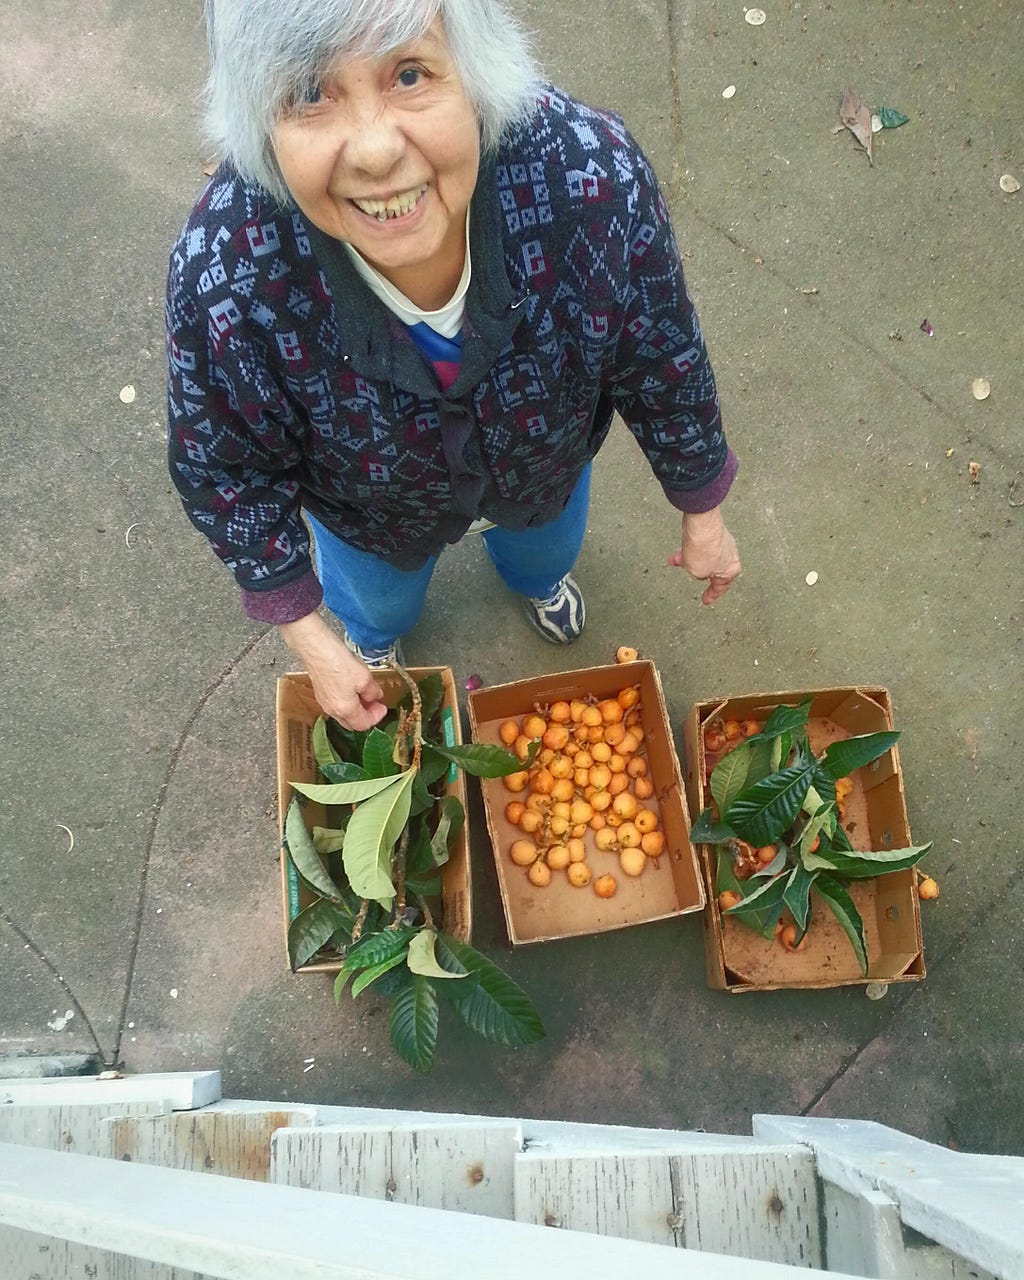 My grandma looking up at the camera and smiling, a few boxes in front of her filled with leaves, branches, and loquats